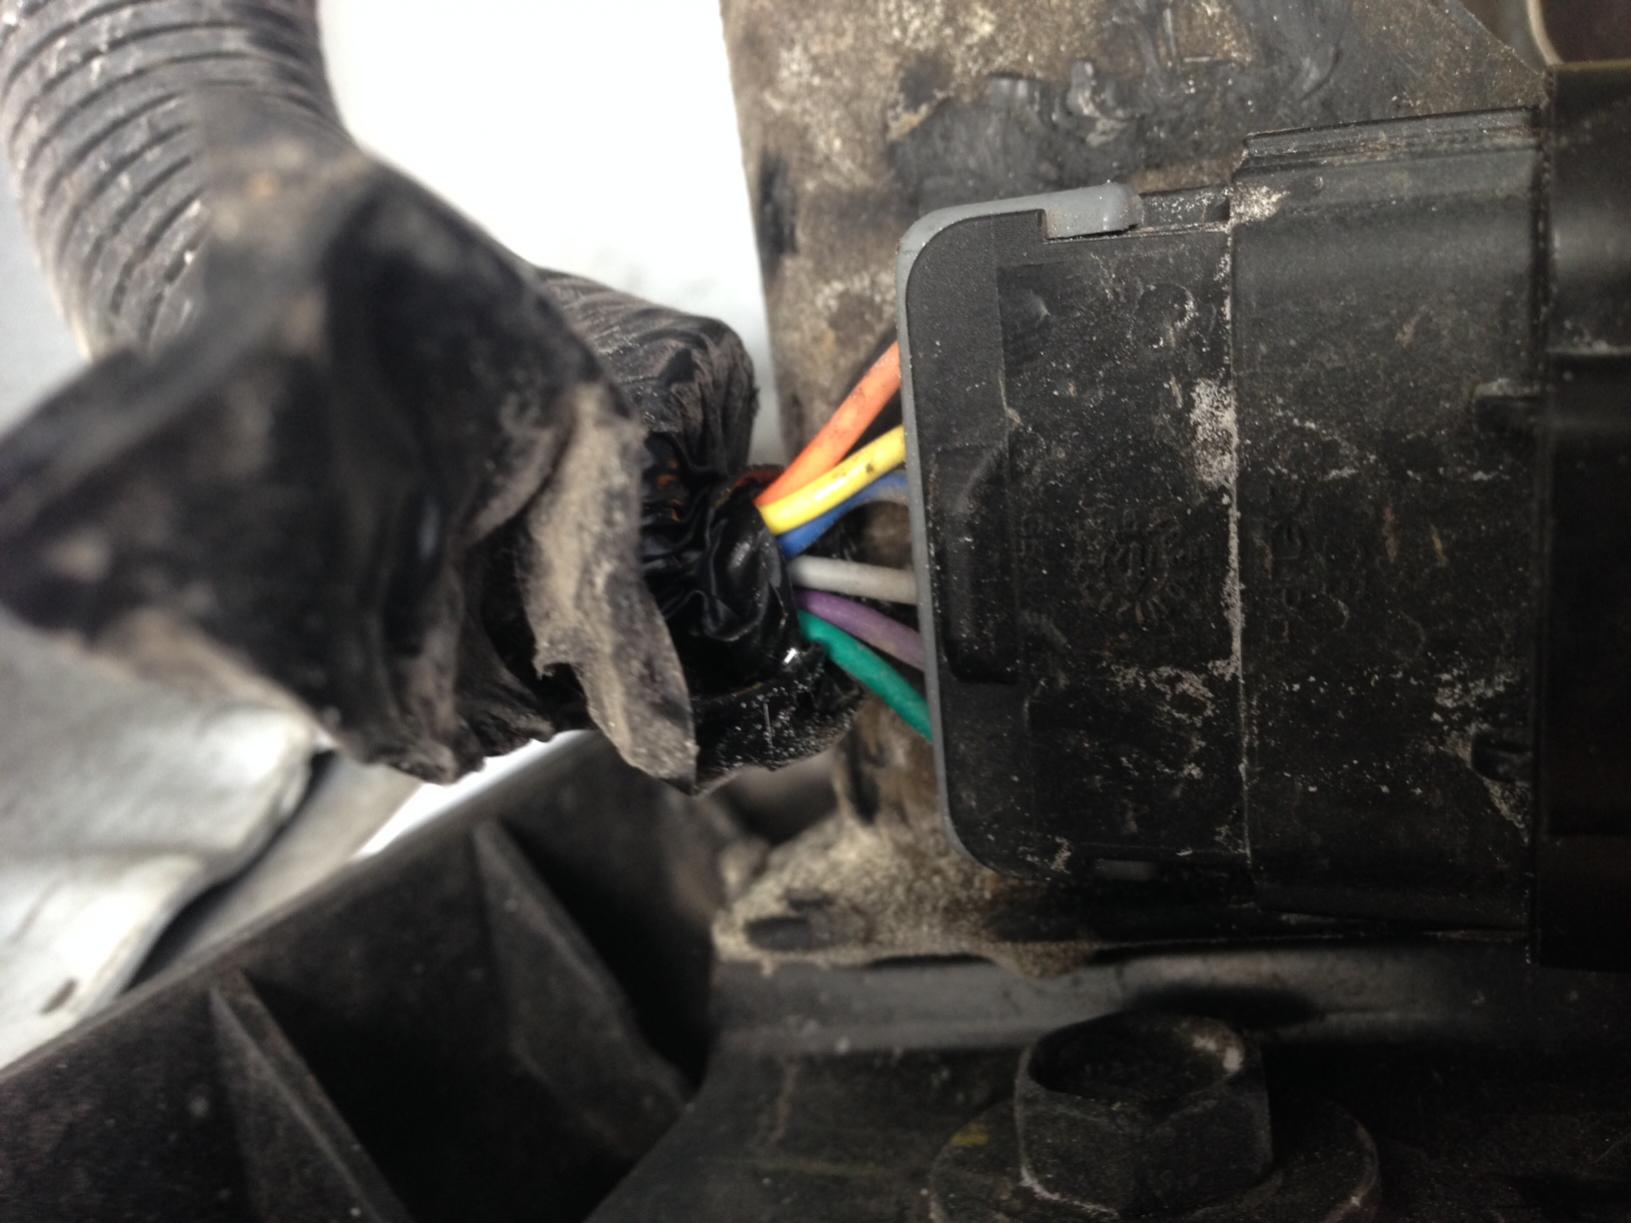 Mystery connector/Trailer wiring? - Chevrolet Forum - Chevy Enthusiasts Forums